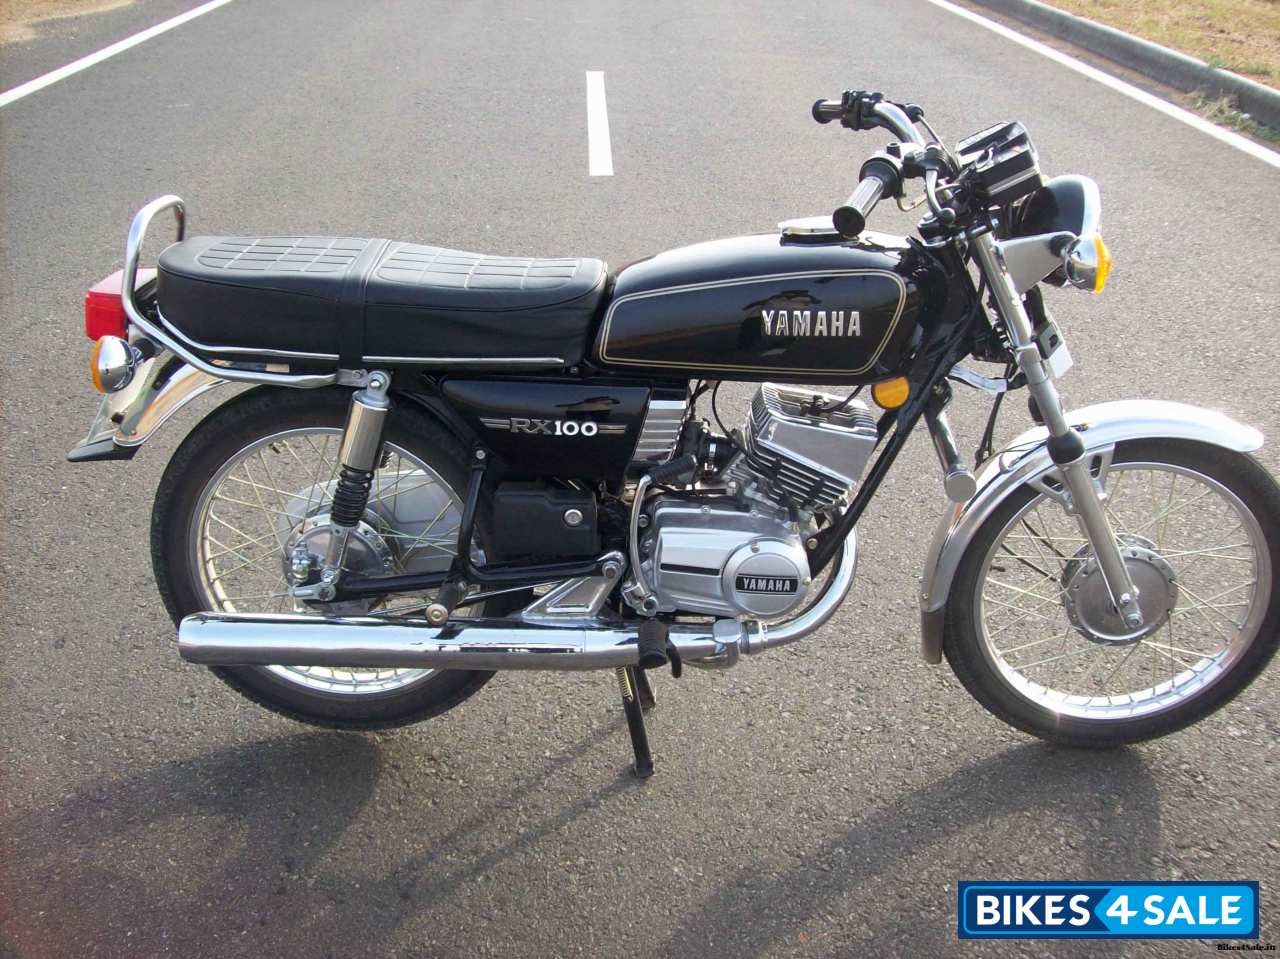 Used 1989 Model Yamaha Rx 100 For Sale In Hyderabad Id 58487